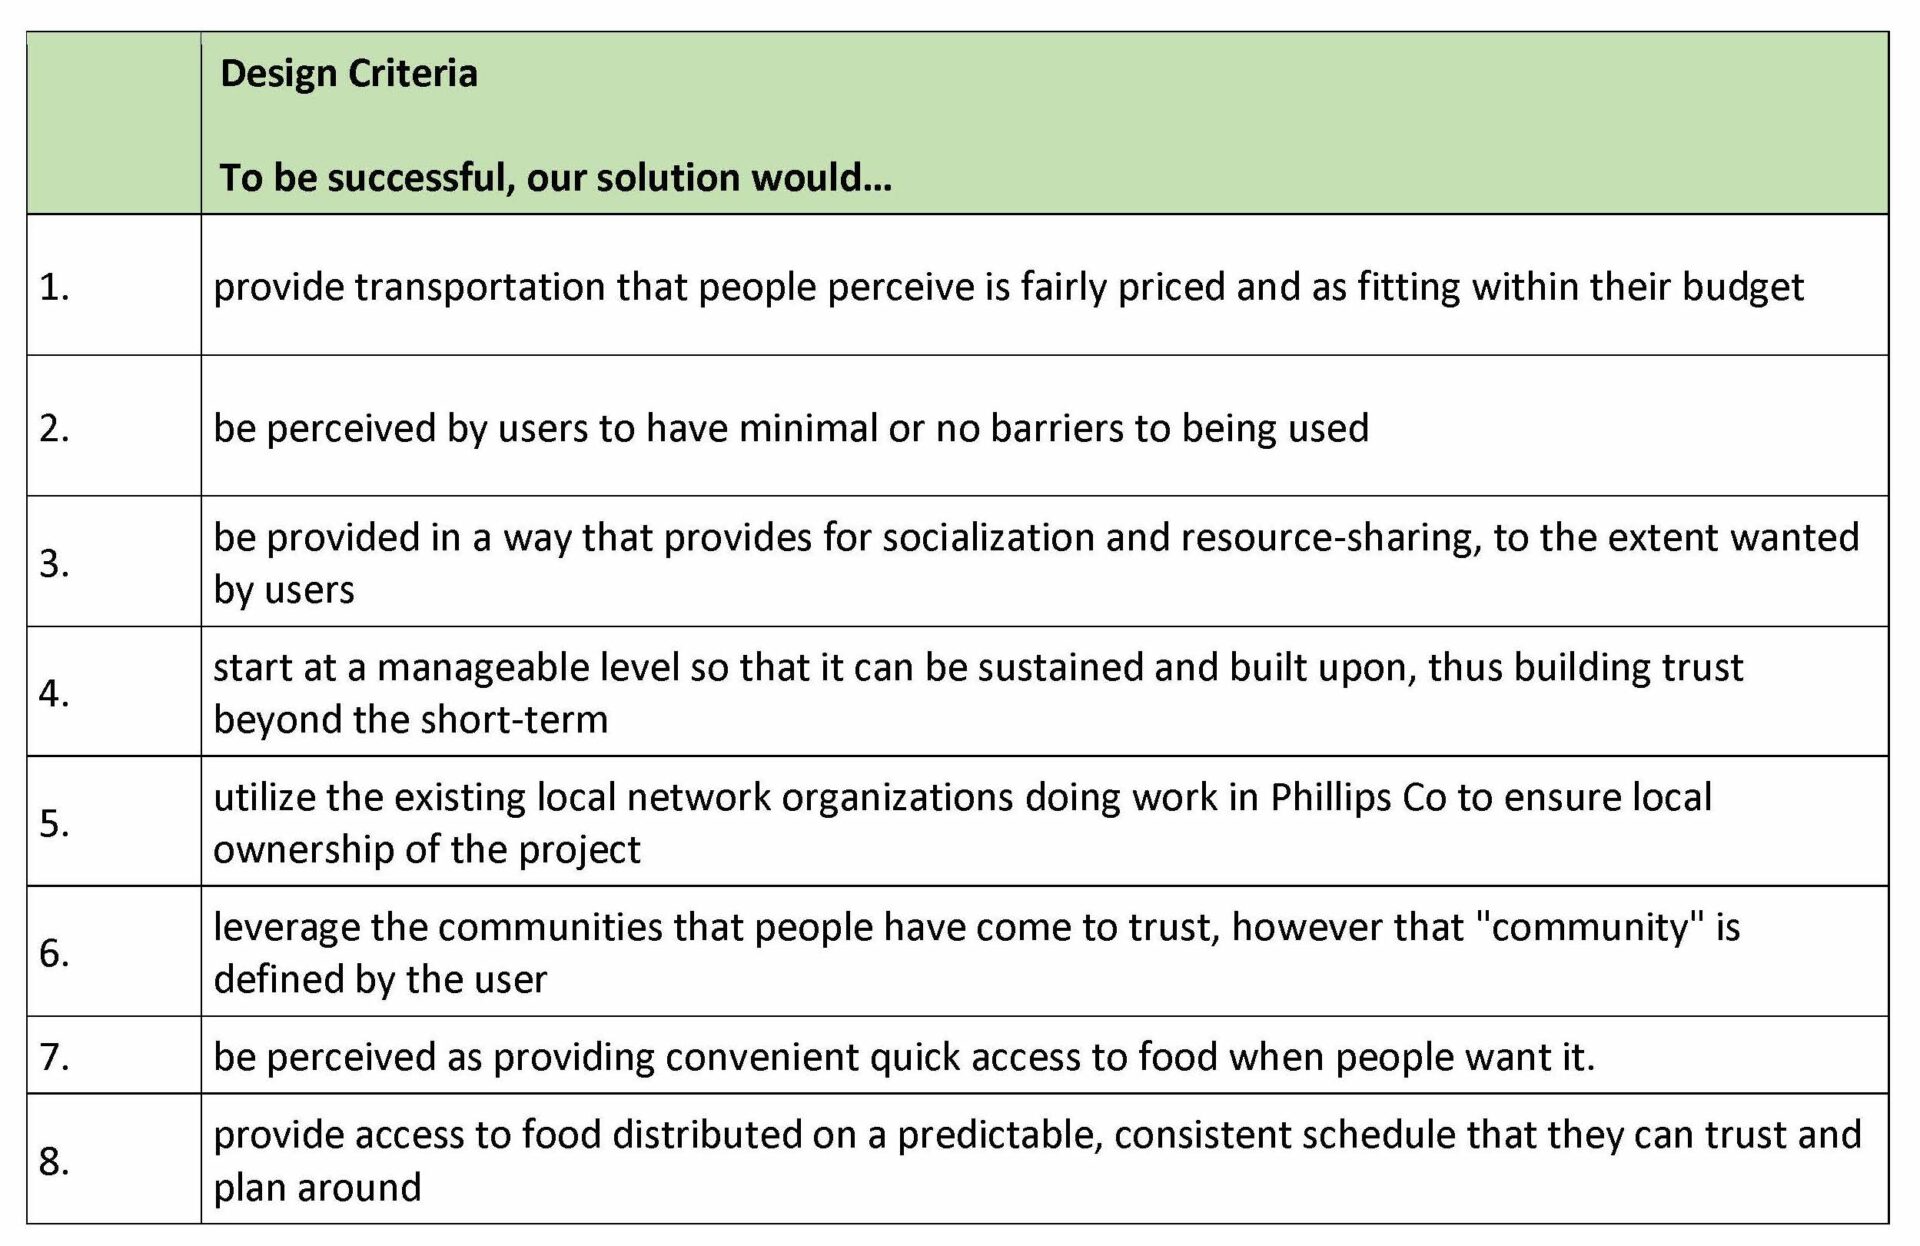 Design Criteria To be successful, our solution would… provide transportation that people perceive is fairly priced and as fitting within their budget be perceived by users to have minimal or no barriers to being used be provided in a way that provides for socialization and resource-sharing, to the extent wanted by users start at a manageable level so that it can be sustained and built upon, thus building trust beyond the short-term utilize the existing local network organizations doing work in Phillips Co to ensure local ownership of the project leverage the communities that people have come to trust, however that "community" is defined by the user be perceived as providing convenient quick access to food when people want it. provide access to food distributed on a predictable, consistent schedule that they can trust and plan around